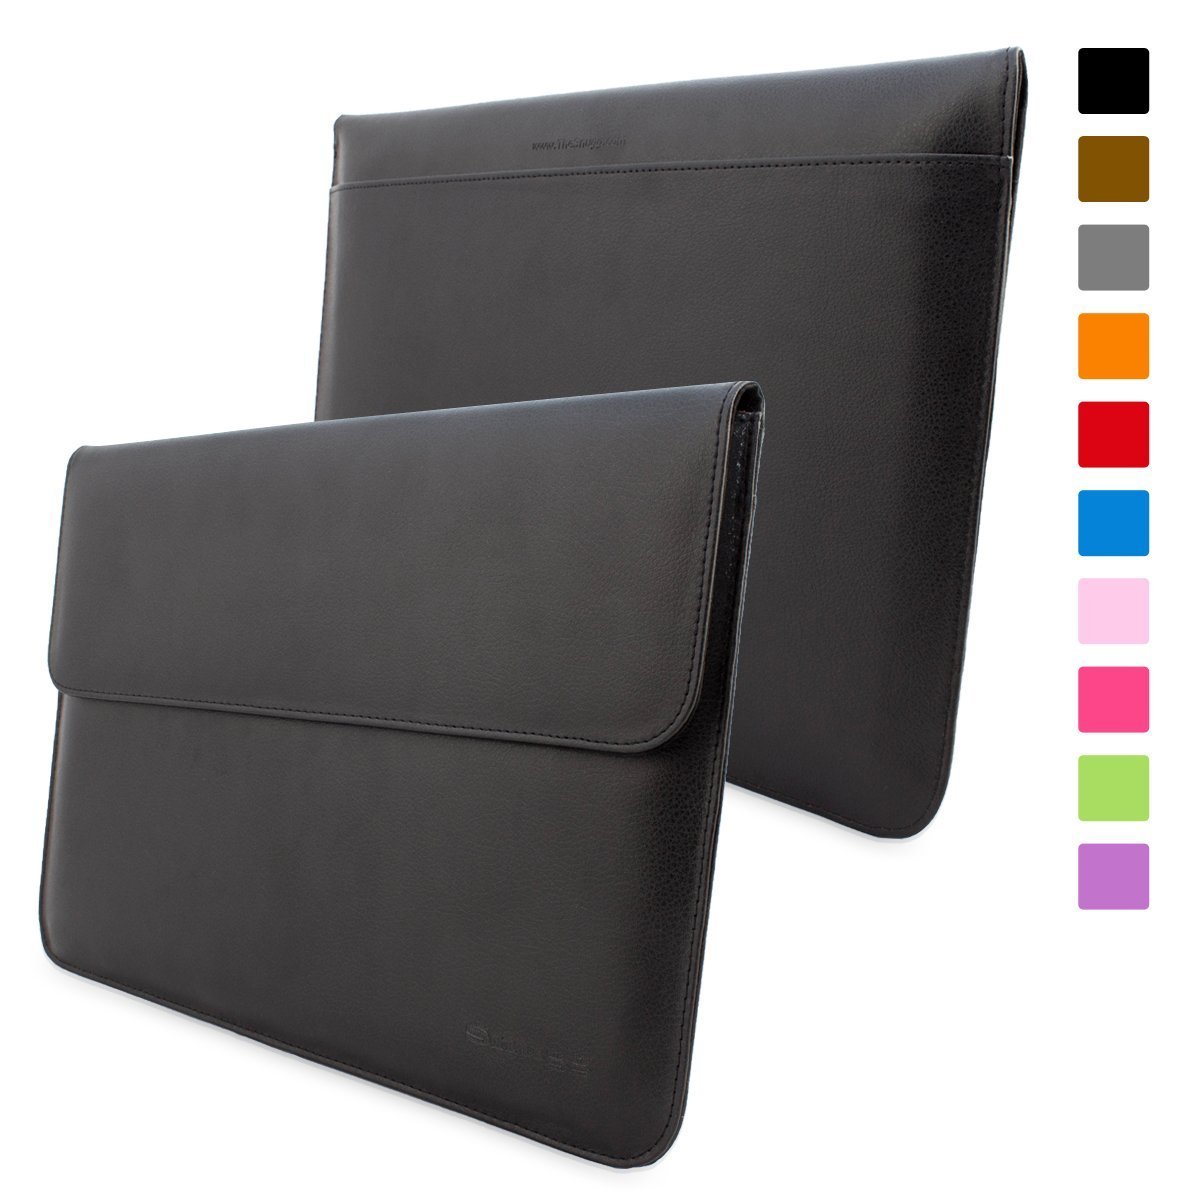 Snugg sleeve for 12 inch MacBook